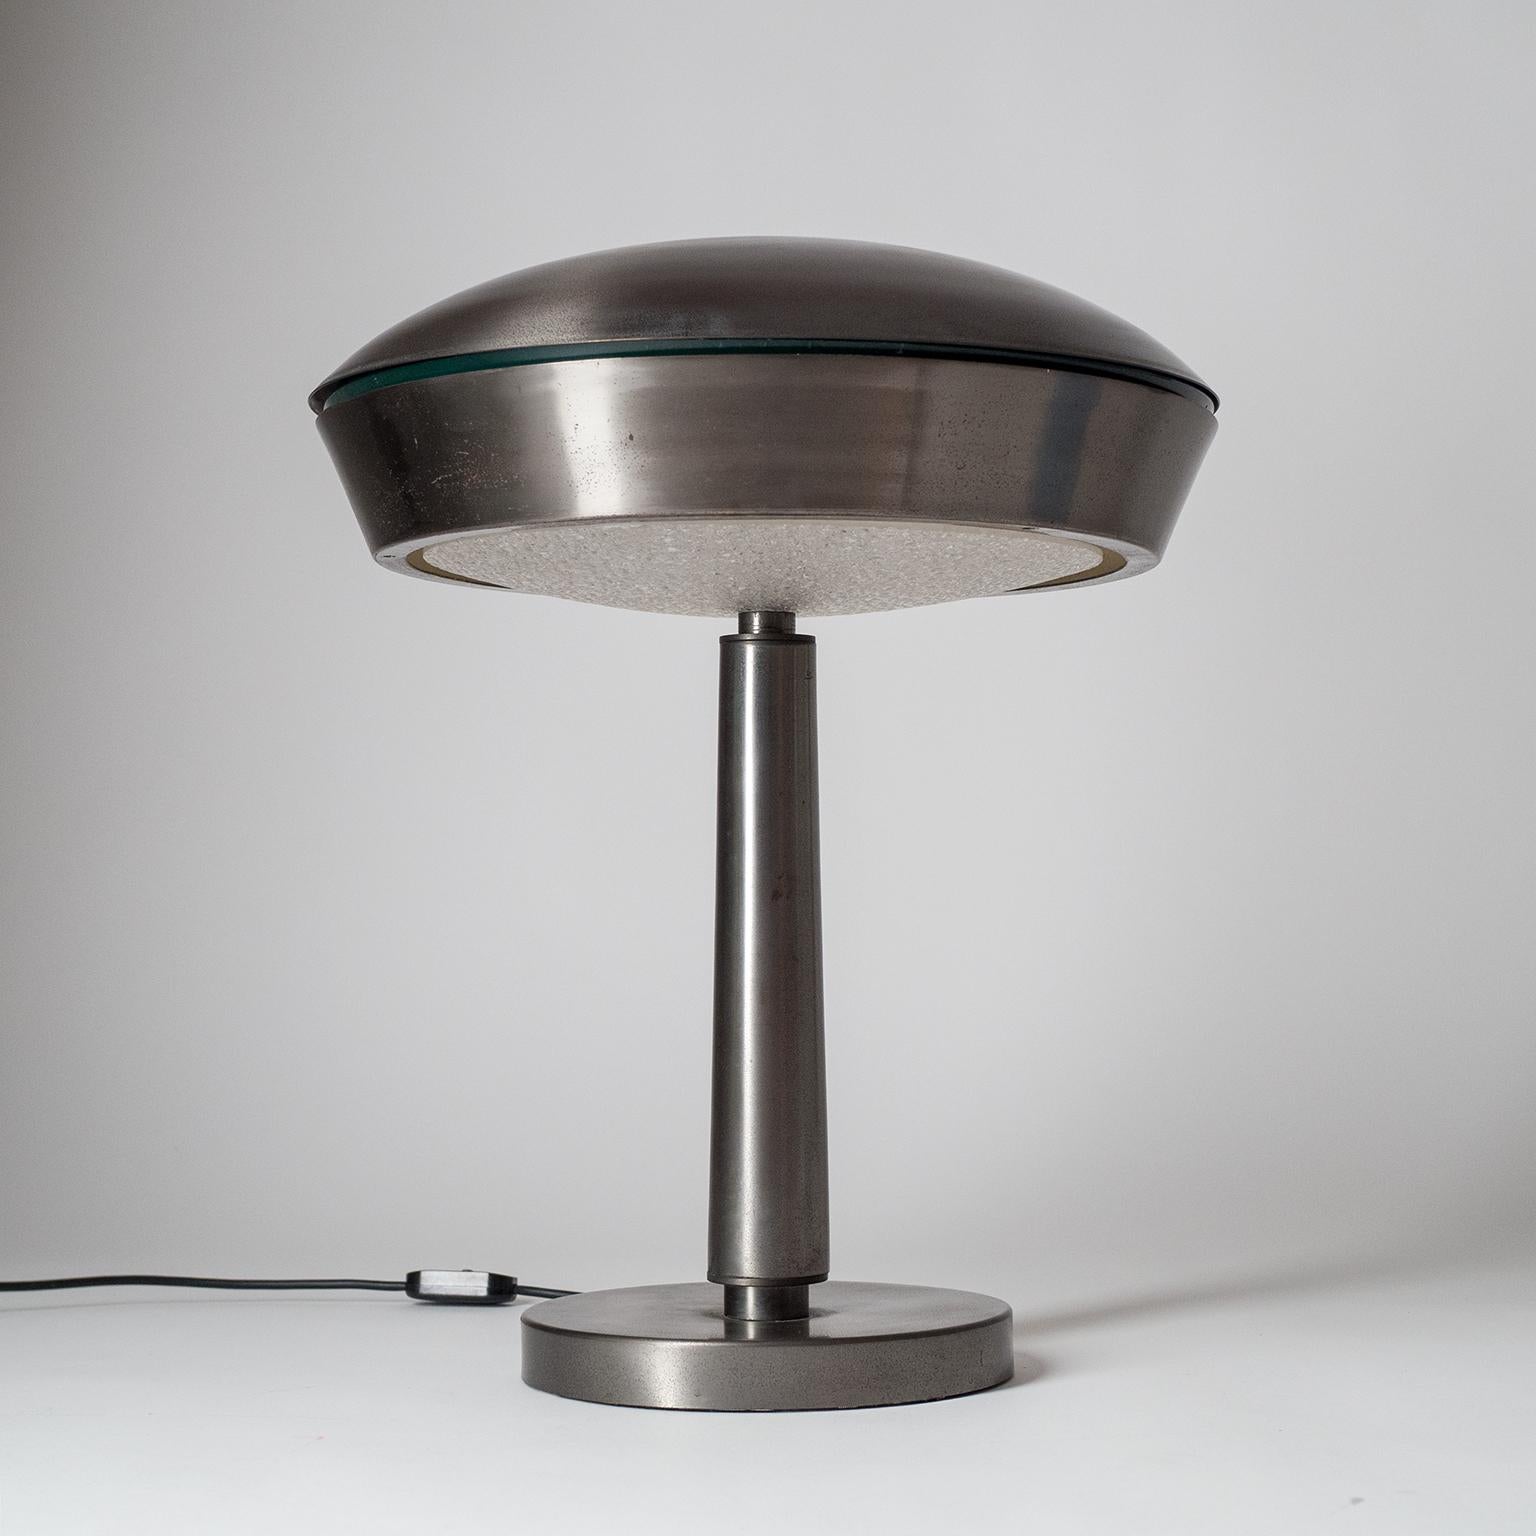 Large patinated brass or bronze desk or table lamp attributed to Fontana Arte, circa 1960 (very similar to mod. 2278). Dark patinated brass with a silvery sheen and textured acrylic diffuser. Three E14 sockets.